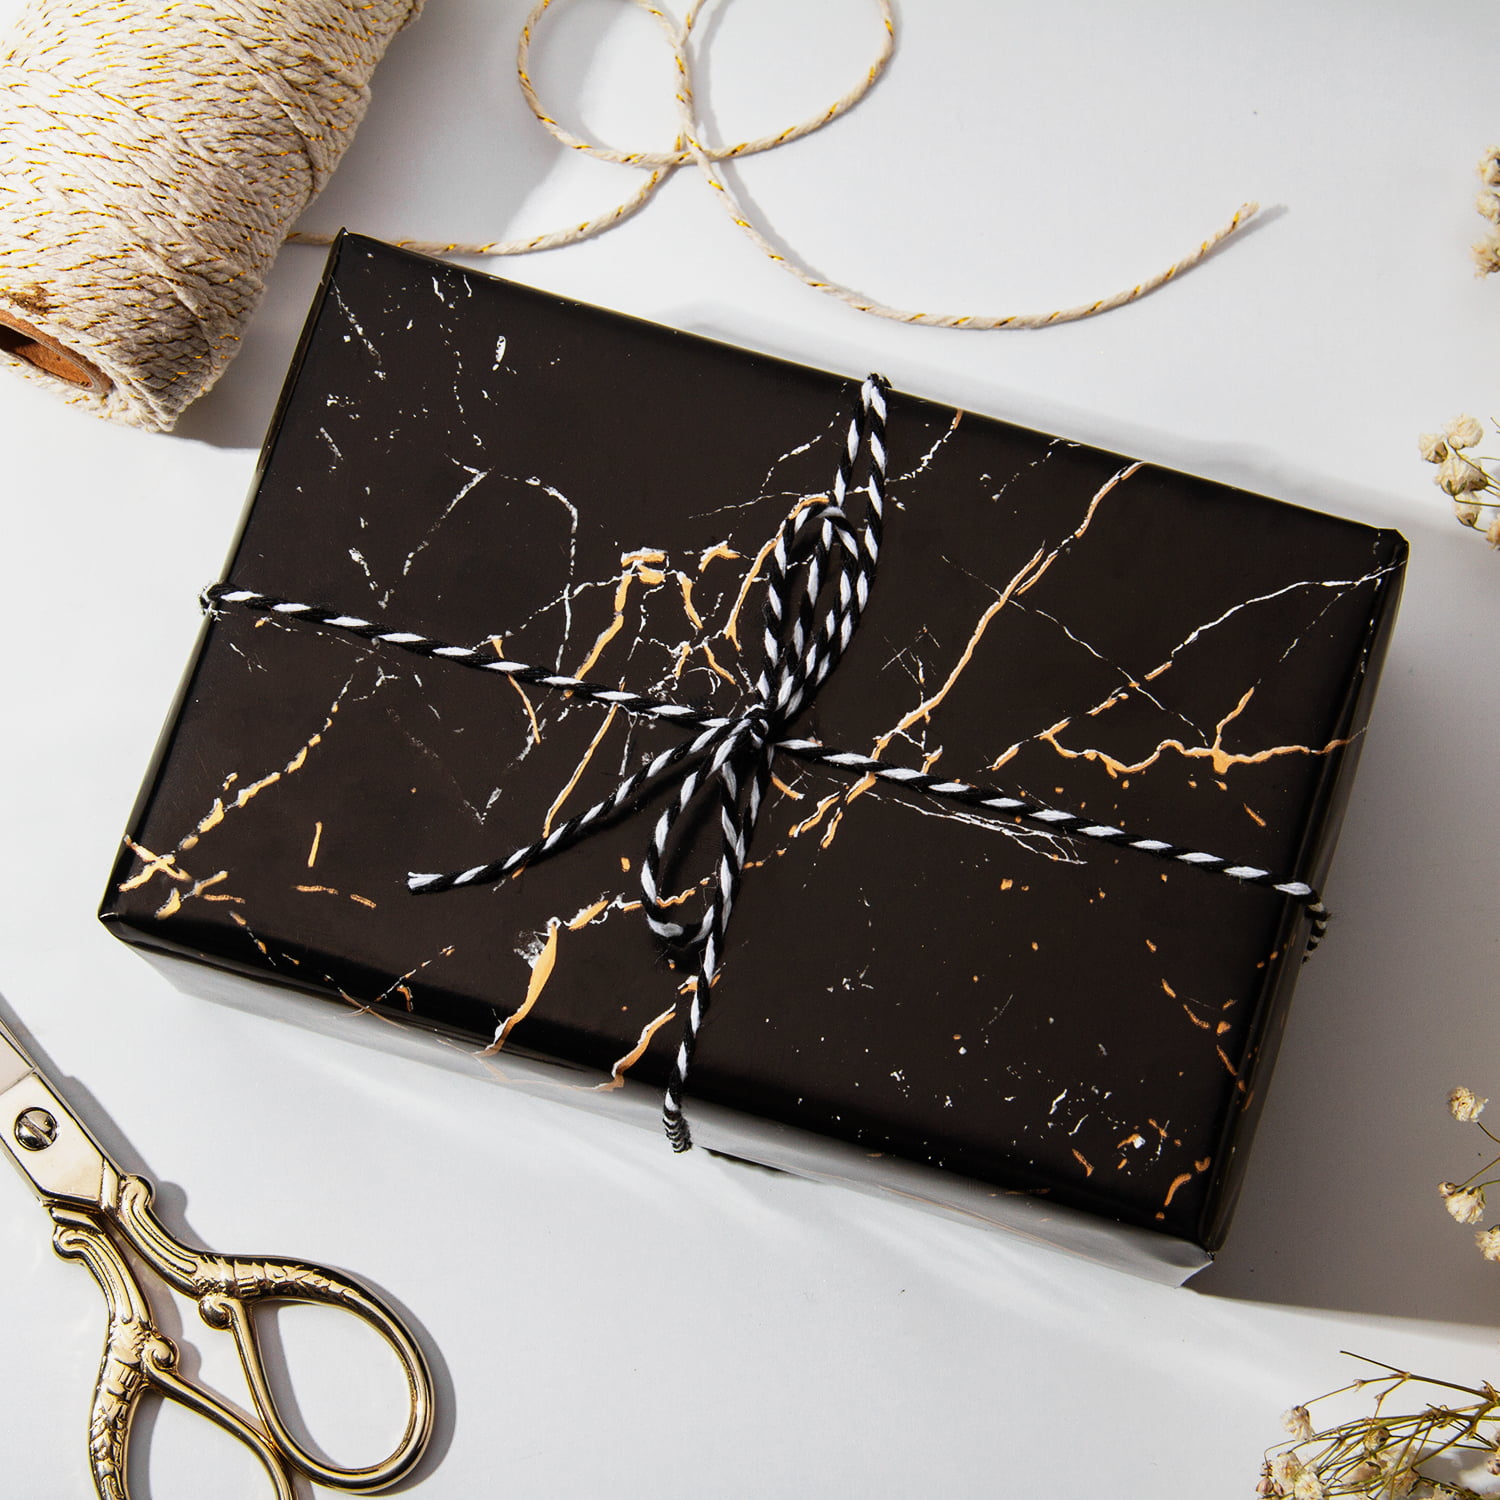 Bolsome 28 * 20 Inches Black Gold Design Gift Wrapping Paper, 7 Sheets  Metallic Gold Star Dot Wave Stripe Geometric Pattern Wrapping Paper for